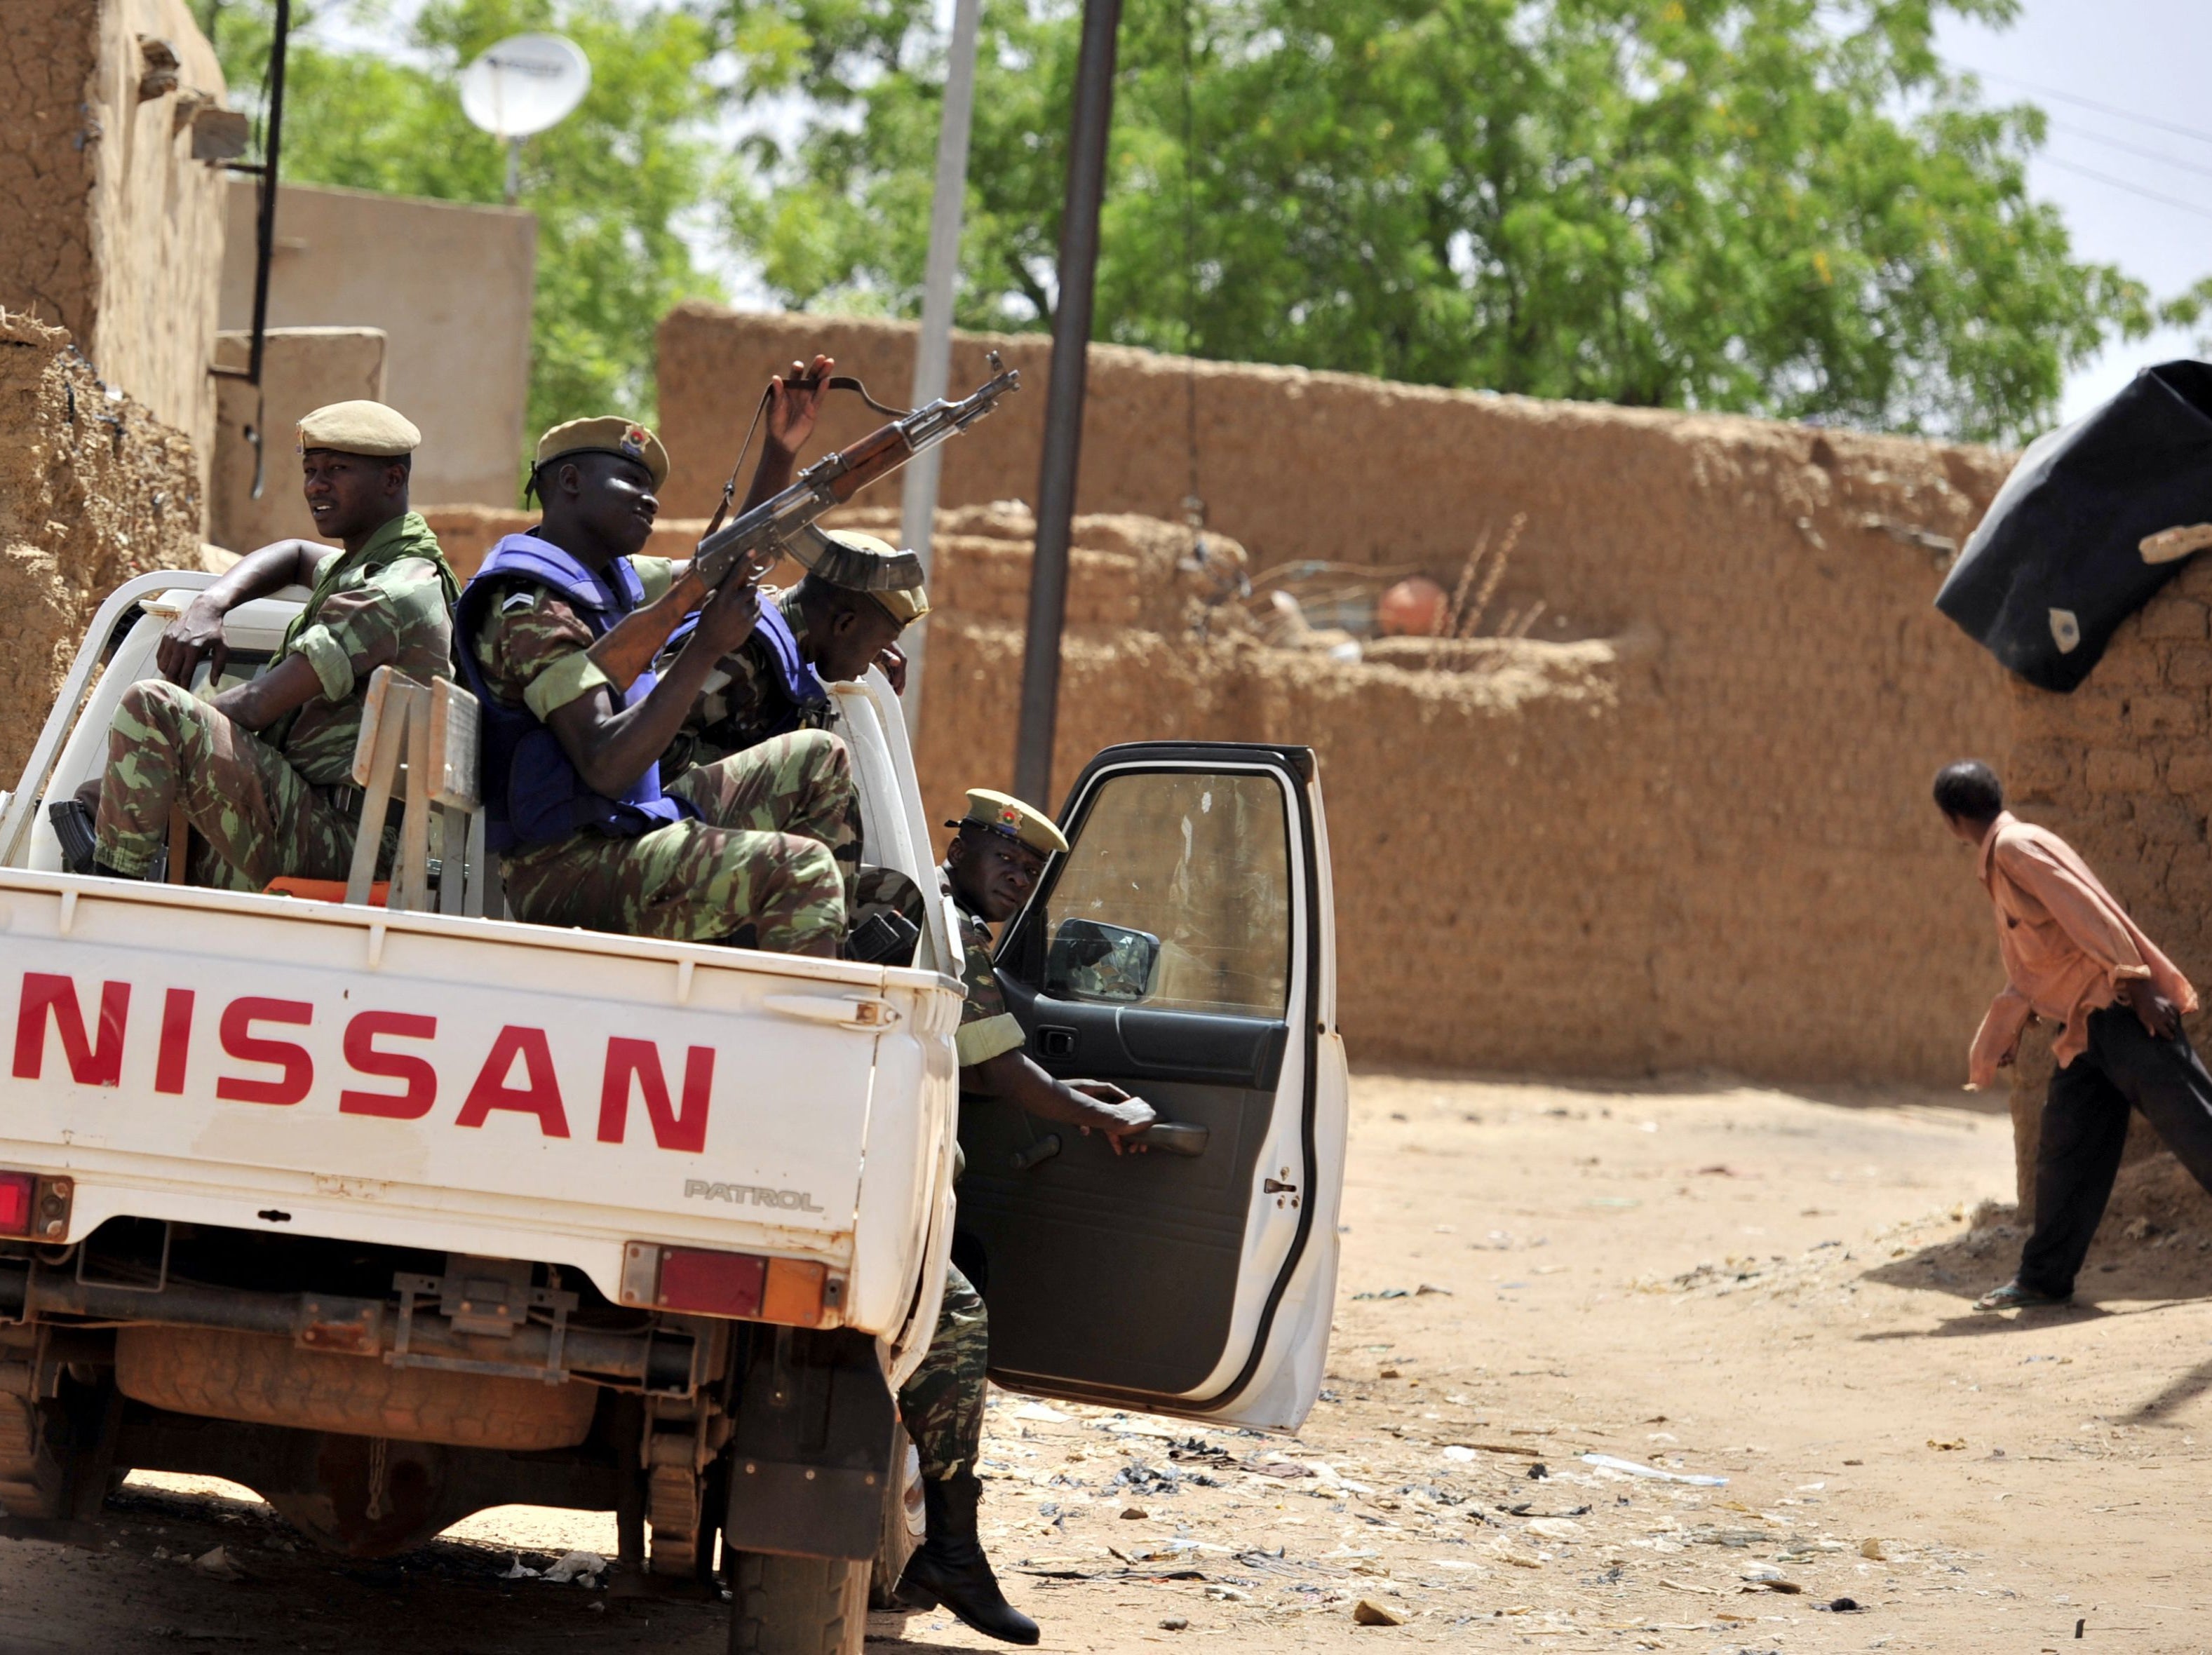 Soldiers on patrol in northern Burkina Faso, which has been targeted by jihadists over the past five years.